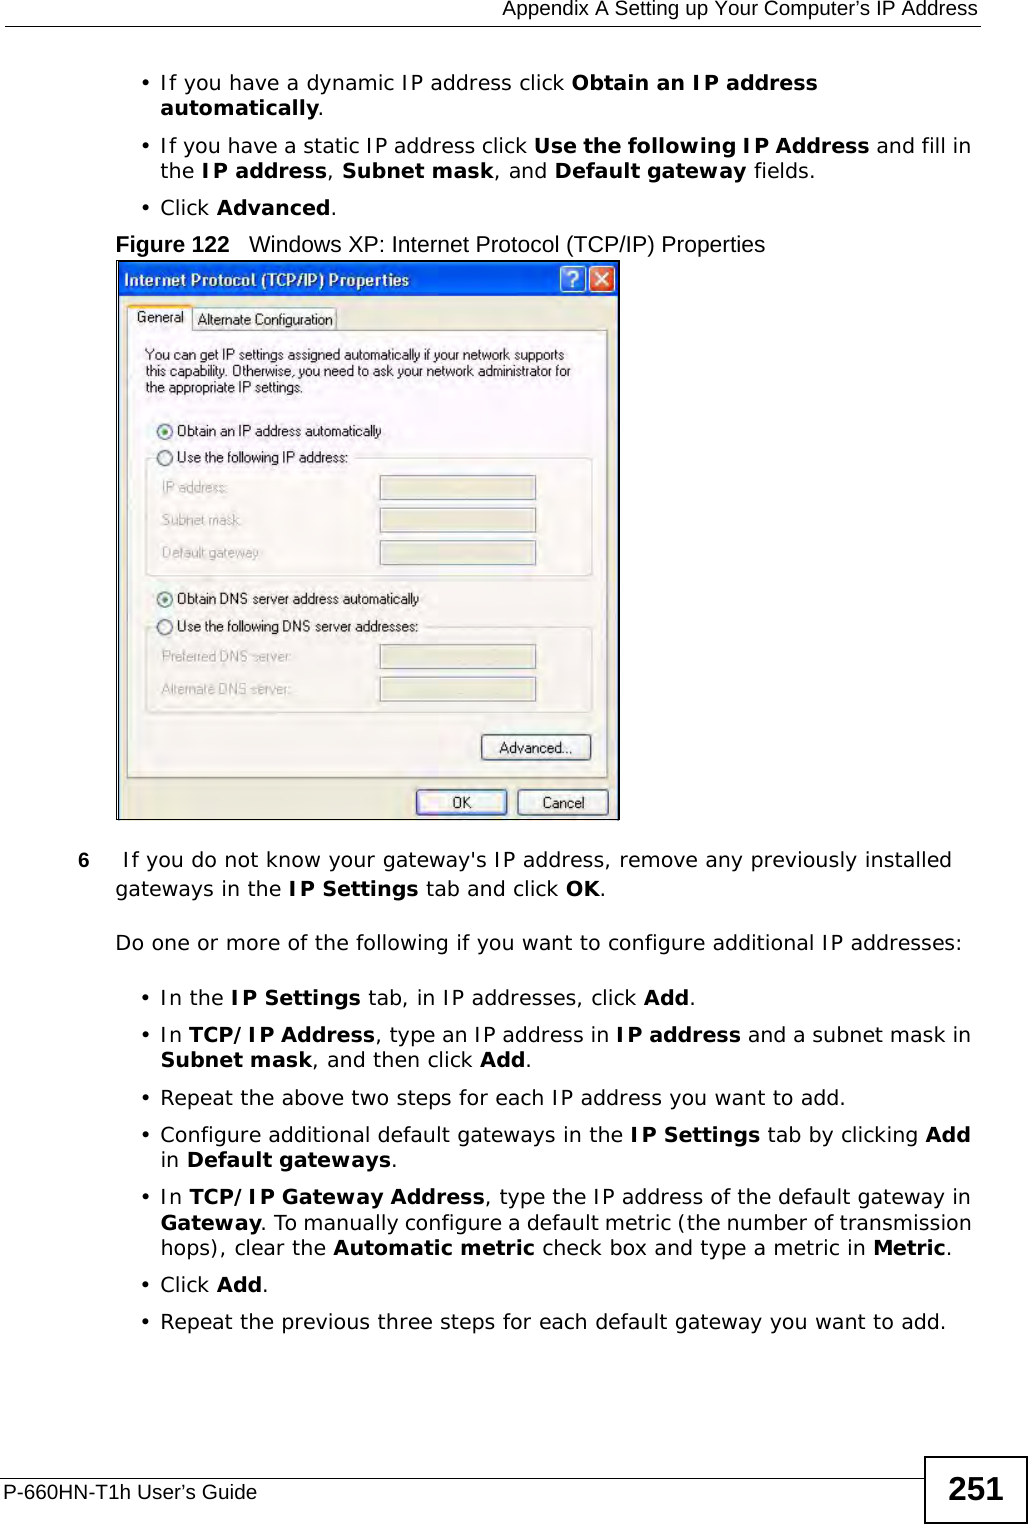  Appendix A Setting up Your Computer’s IP AddressP-660HN-T1h User’s Guide 251• If you have a dynamic IP address click Obtain an IP address automatically.• If you have a static IP address click Use the following IP Address and fill in the IP address, Subnet mask, and Default gateway fields. •Click Advanced.Figure 122   Windows XP: Internet Protocol (TCP/IP) Properties6 If you do not know your gateway&apos;s IP address, remove any previously installed gateways in the IP Settings tab and click OK.Do one or more of the following if you want to configure additional IP addresses:•In the IP Settings tab, in IP addresses, click Add.•In TCP/IP Address, type an IP address in IP address and a subnet mask in Subnet mask, and then click Add.• Repeat the above two steps for each IP address you want to add.• Configure additional default gateways in the IP Settings tab by clicking Add in Default gateways.•In TCP/IP Gateway Address, type the IP address of the default gateway in Gateway. To manually configure a default metric (the number of transmission hops), clear the Automatic metric check box and type a metric in Metric.•Click Add. • Repeat the previous three steps for each default gateway you want to add.